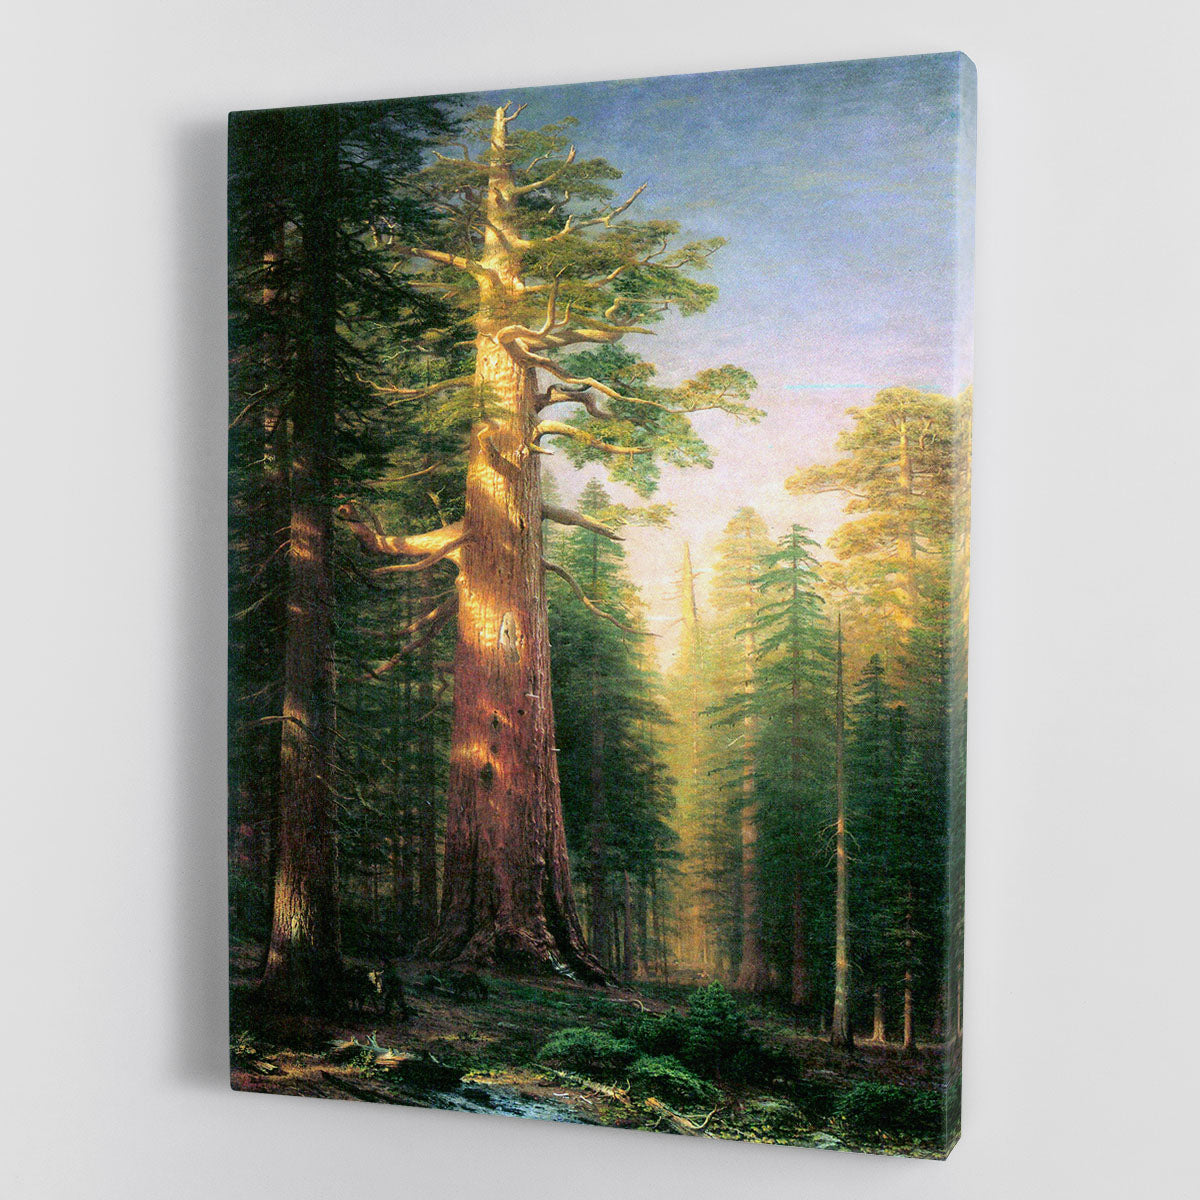 The big trees Mariposa Grove California by Bierstadt Canvas Print or Poster - Canvas Art Rocks - 1